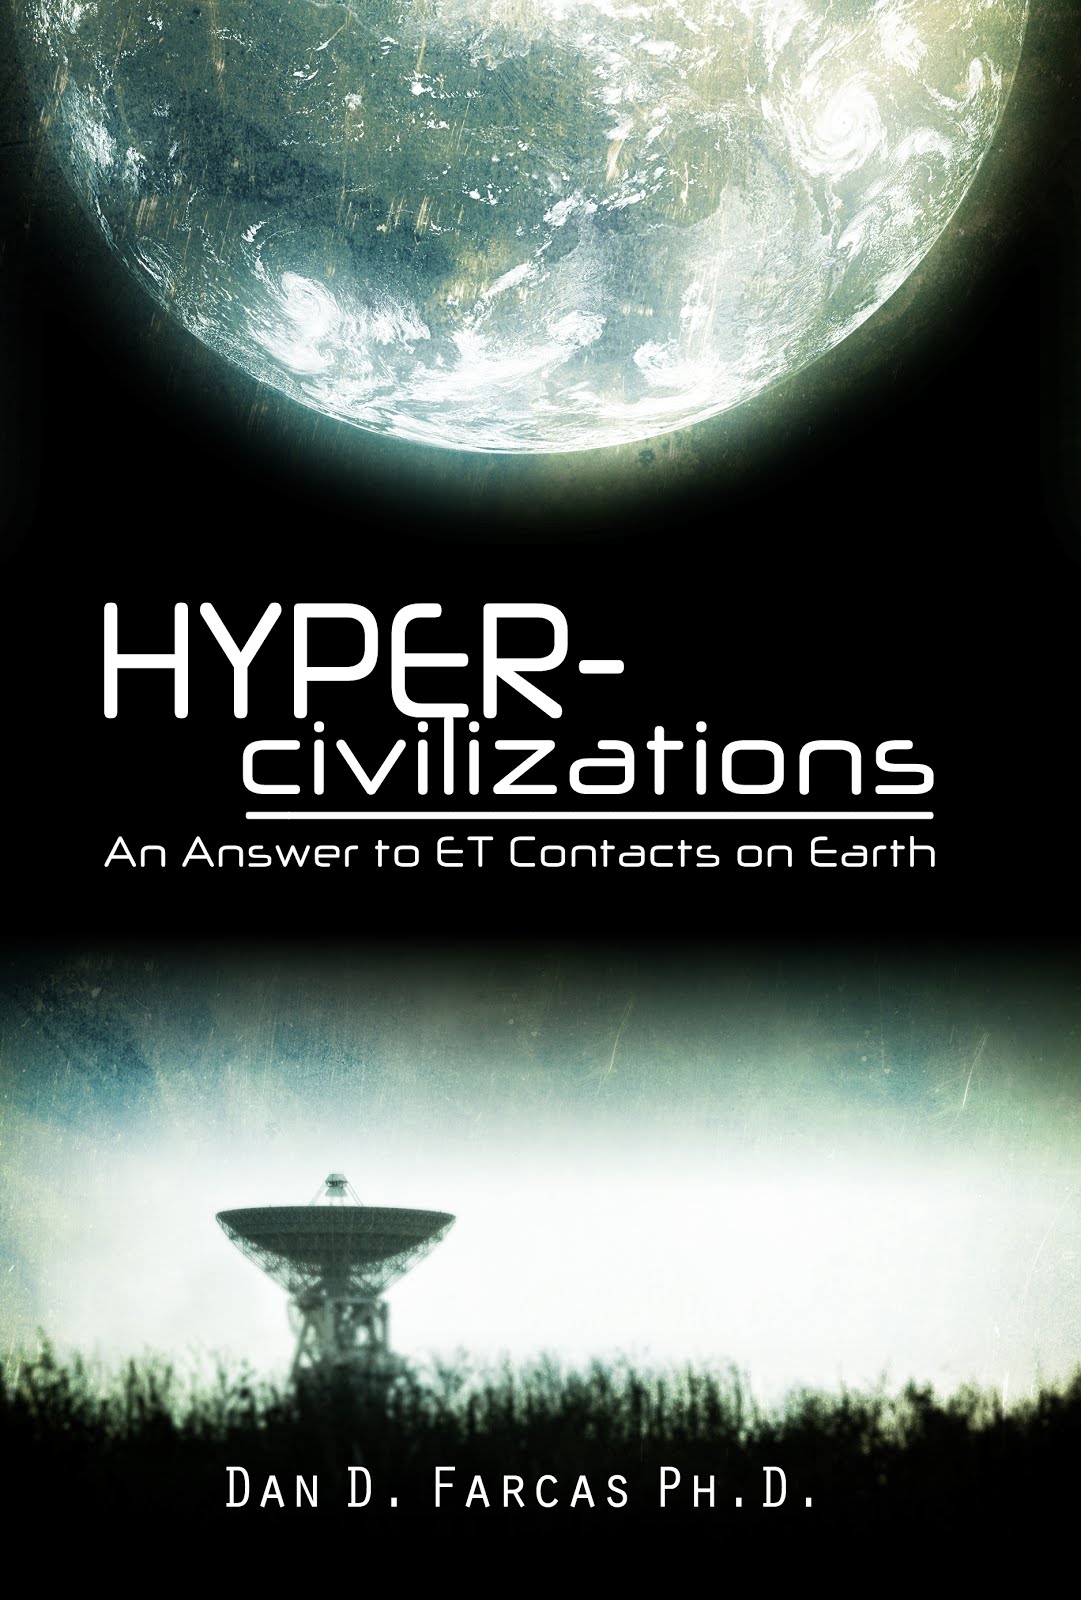 Hyper-civilizations : An Answer to ET Contacts on Earth